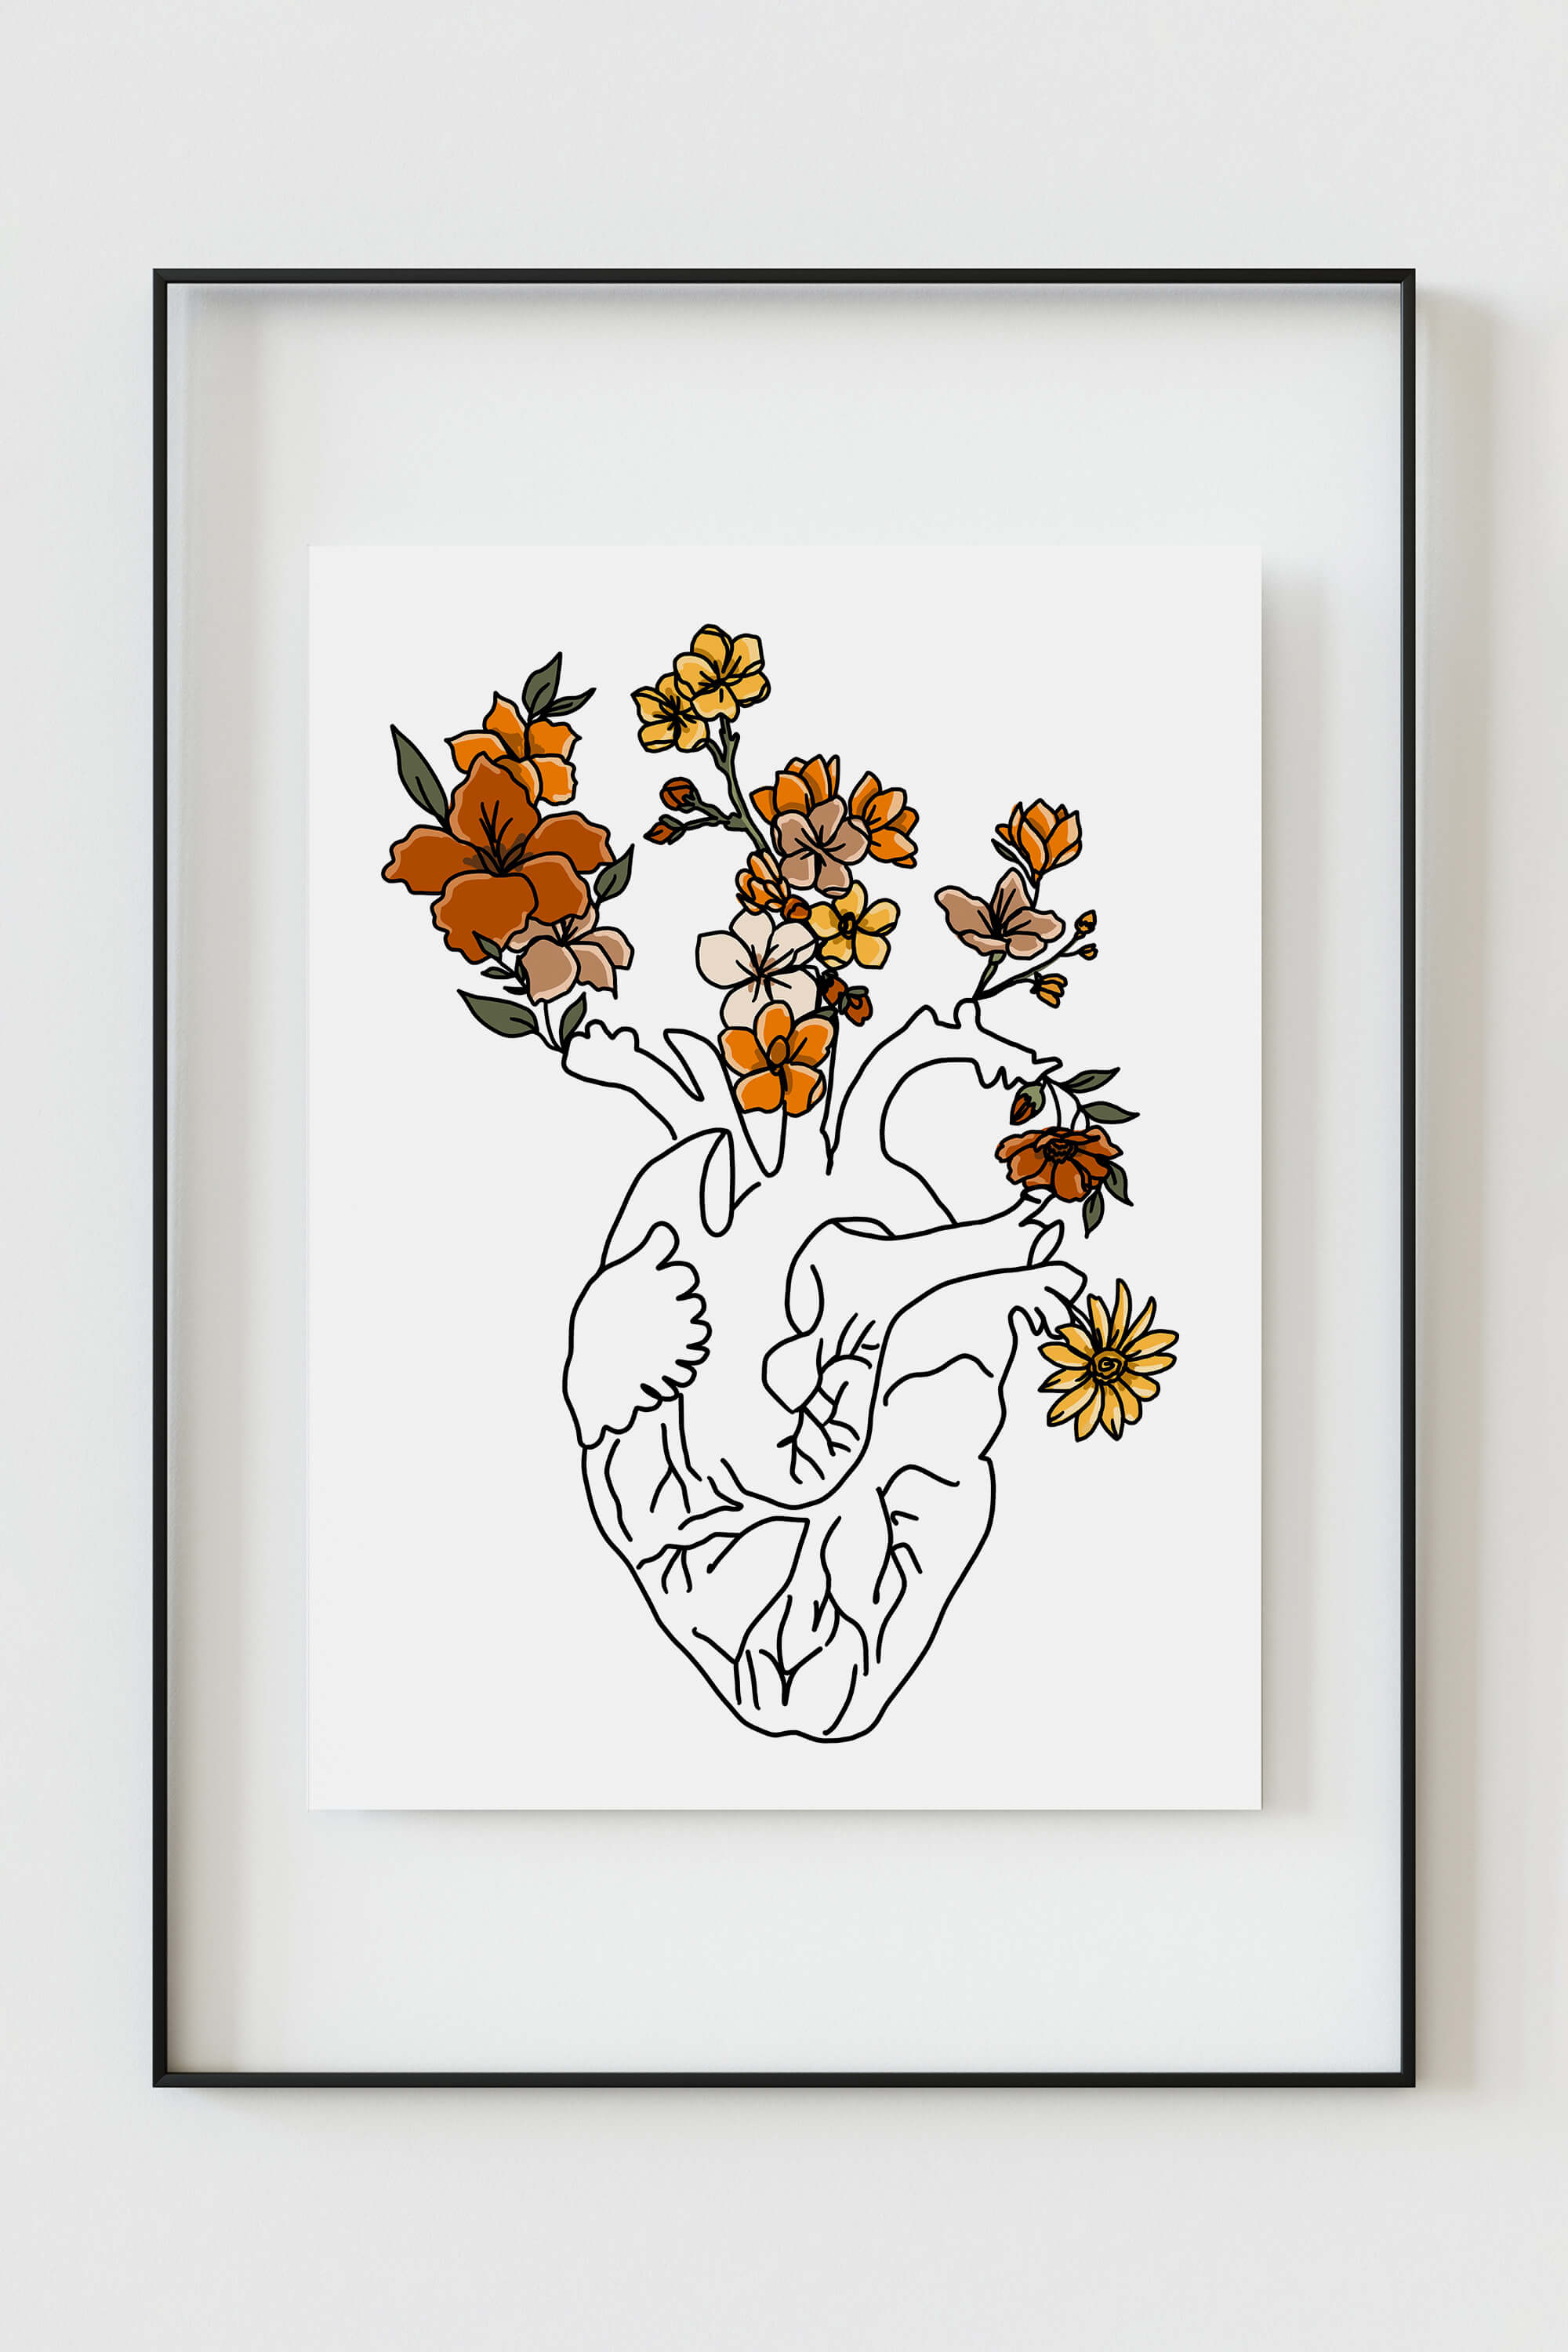 Line Art Print of Anatomical Heart, blending science and art for a unique medical office aesthetic.